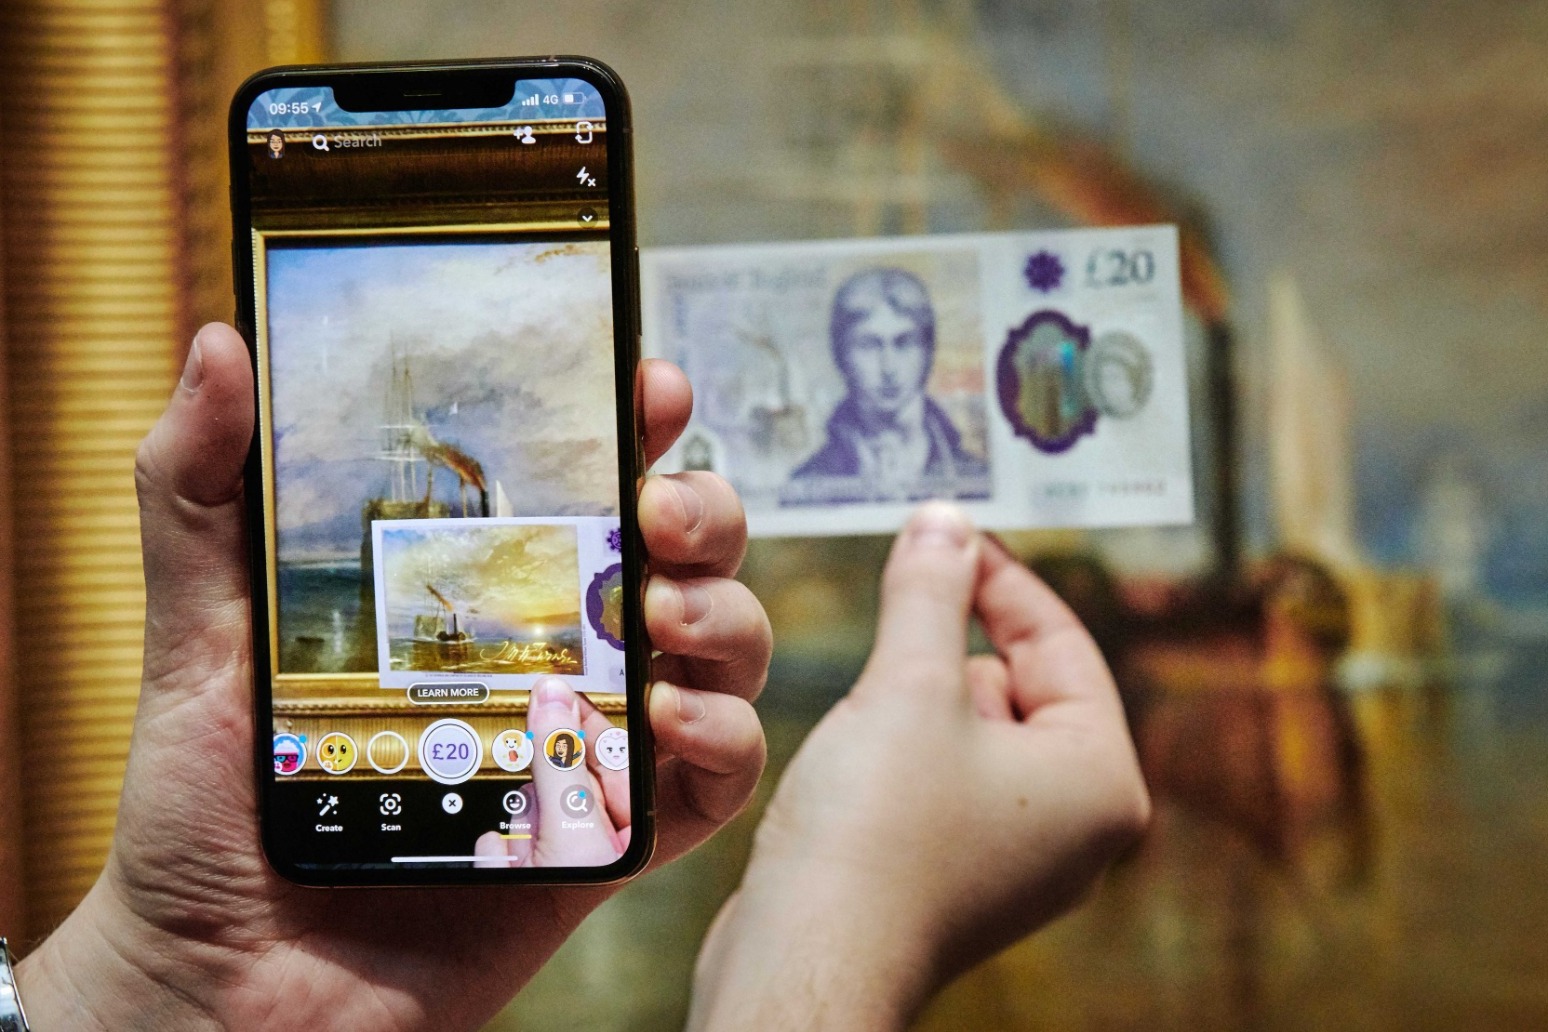 Snapchat releases interactive lens to mark launch of new £20 note 